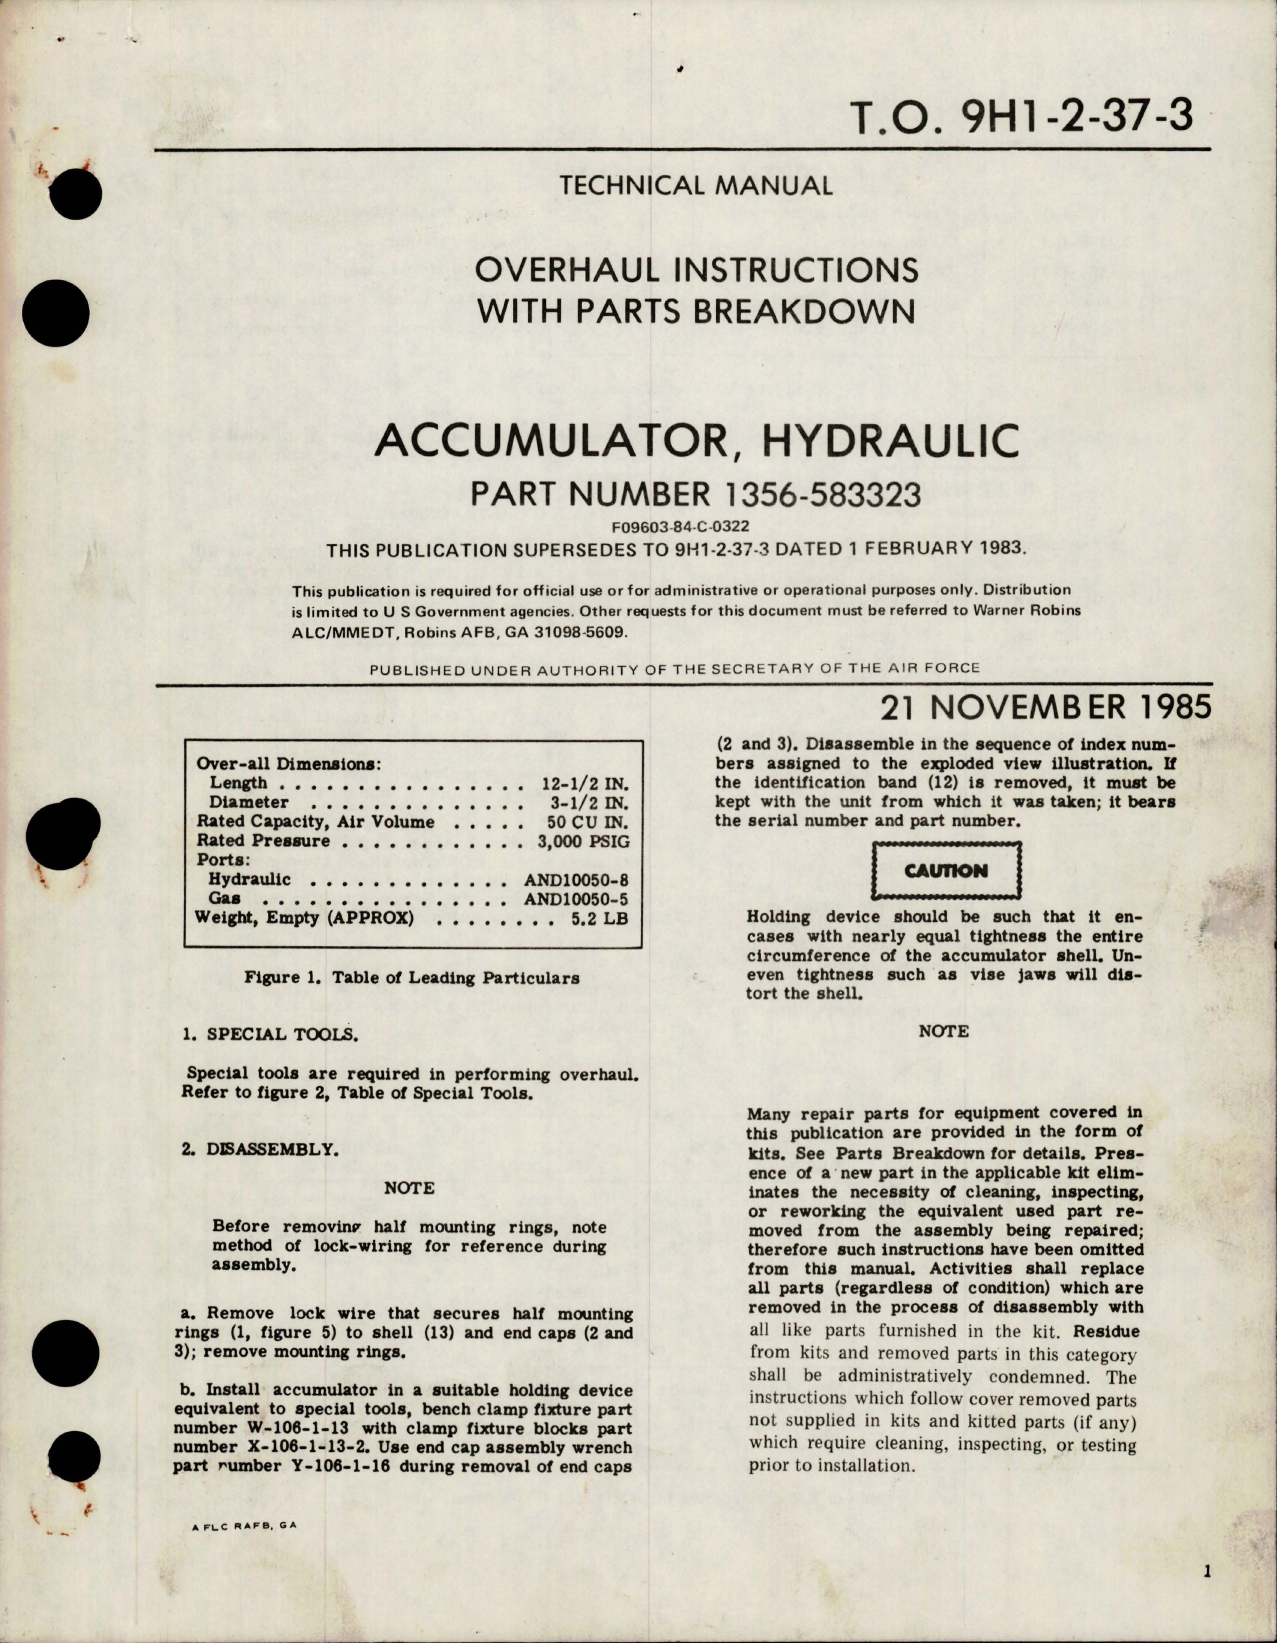 Sample page 1 from AirCorps Library document: Overhaul Instructions with Parts Breakdown for Hydraulic Accumulator - Part 1356-583323 